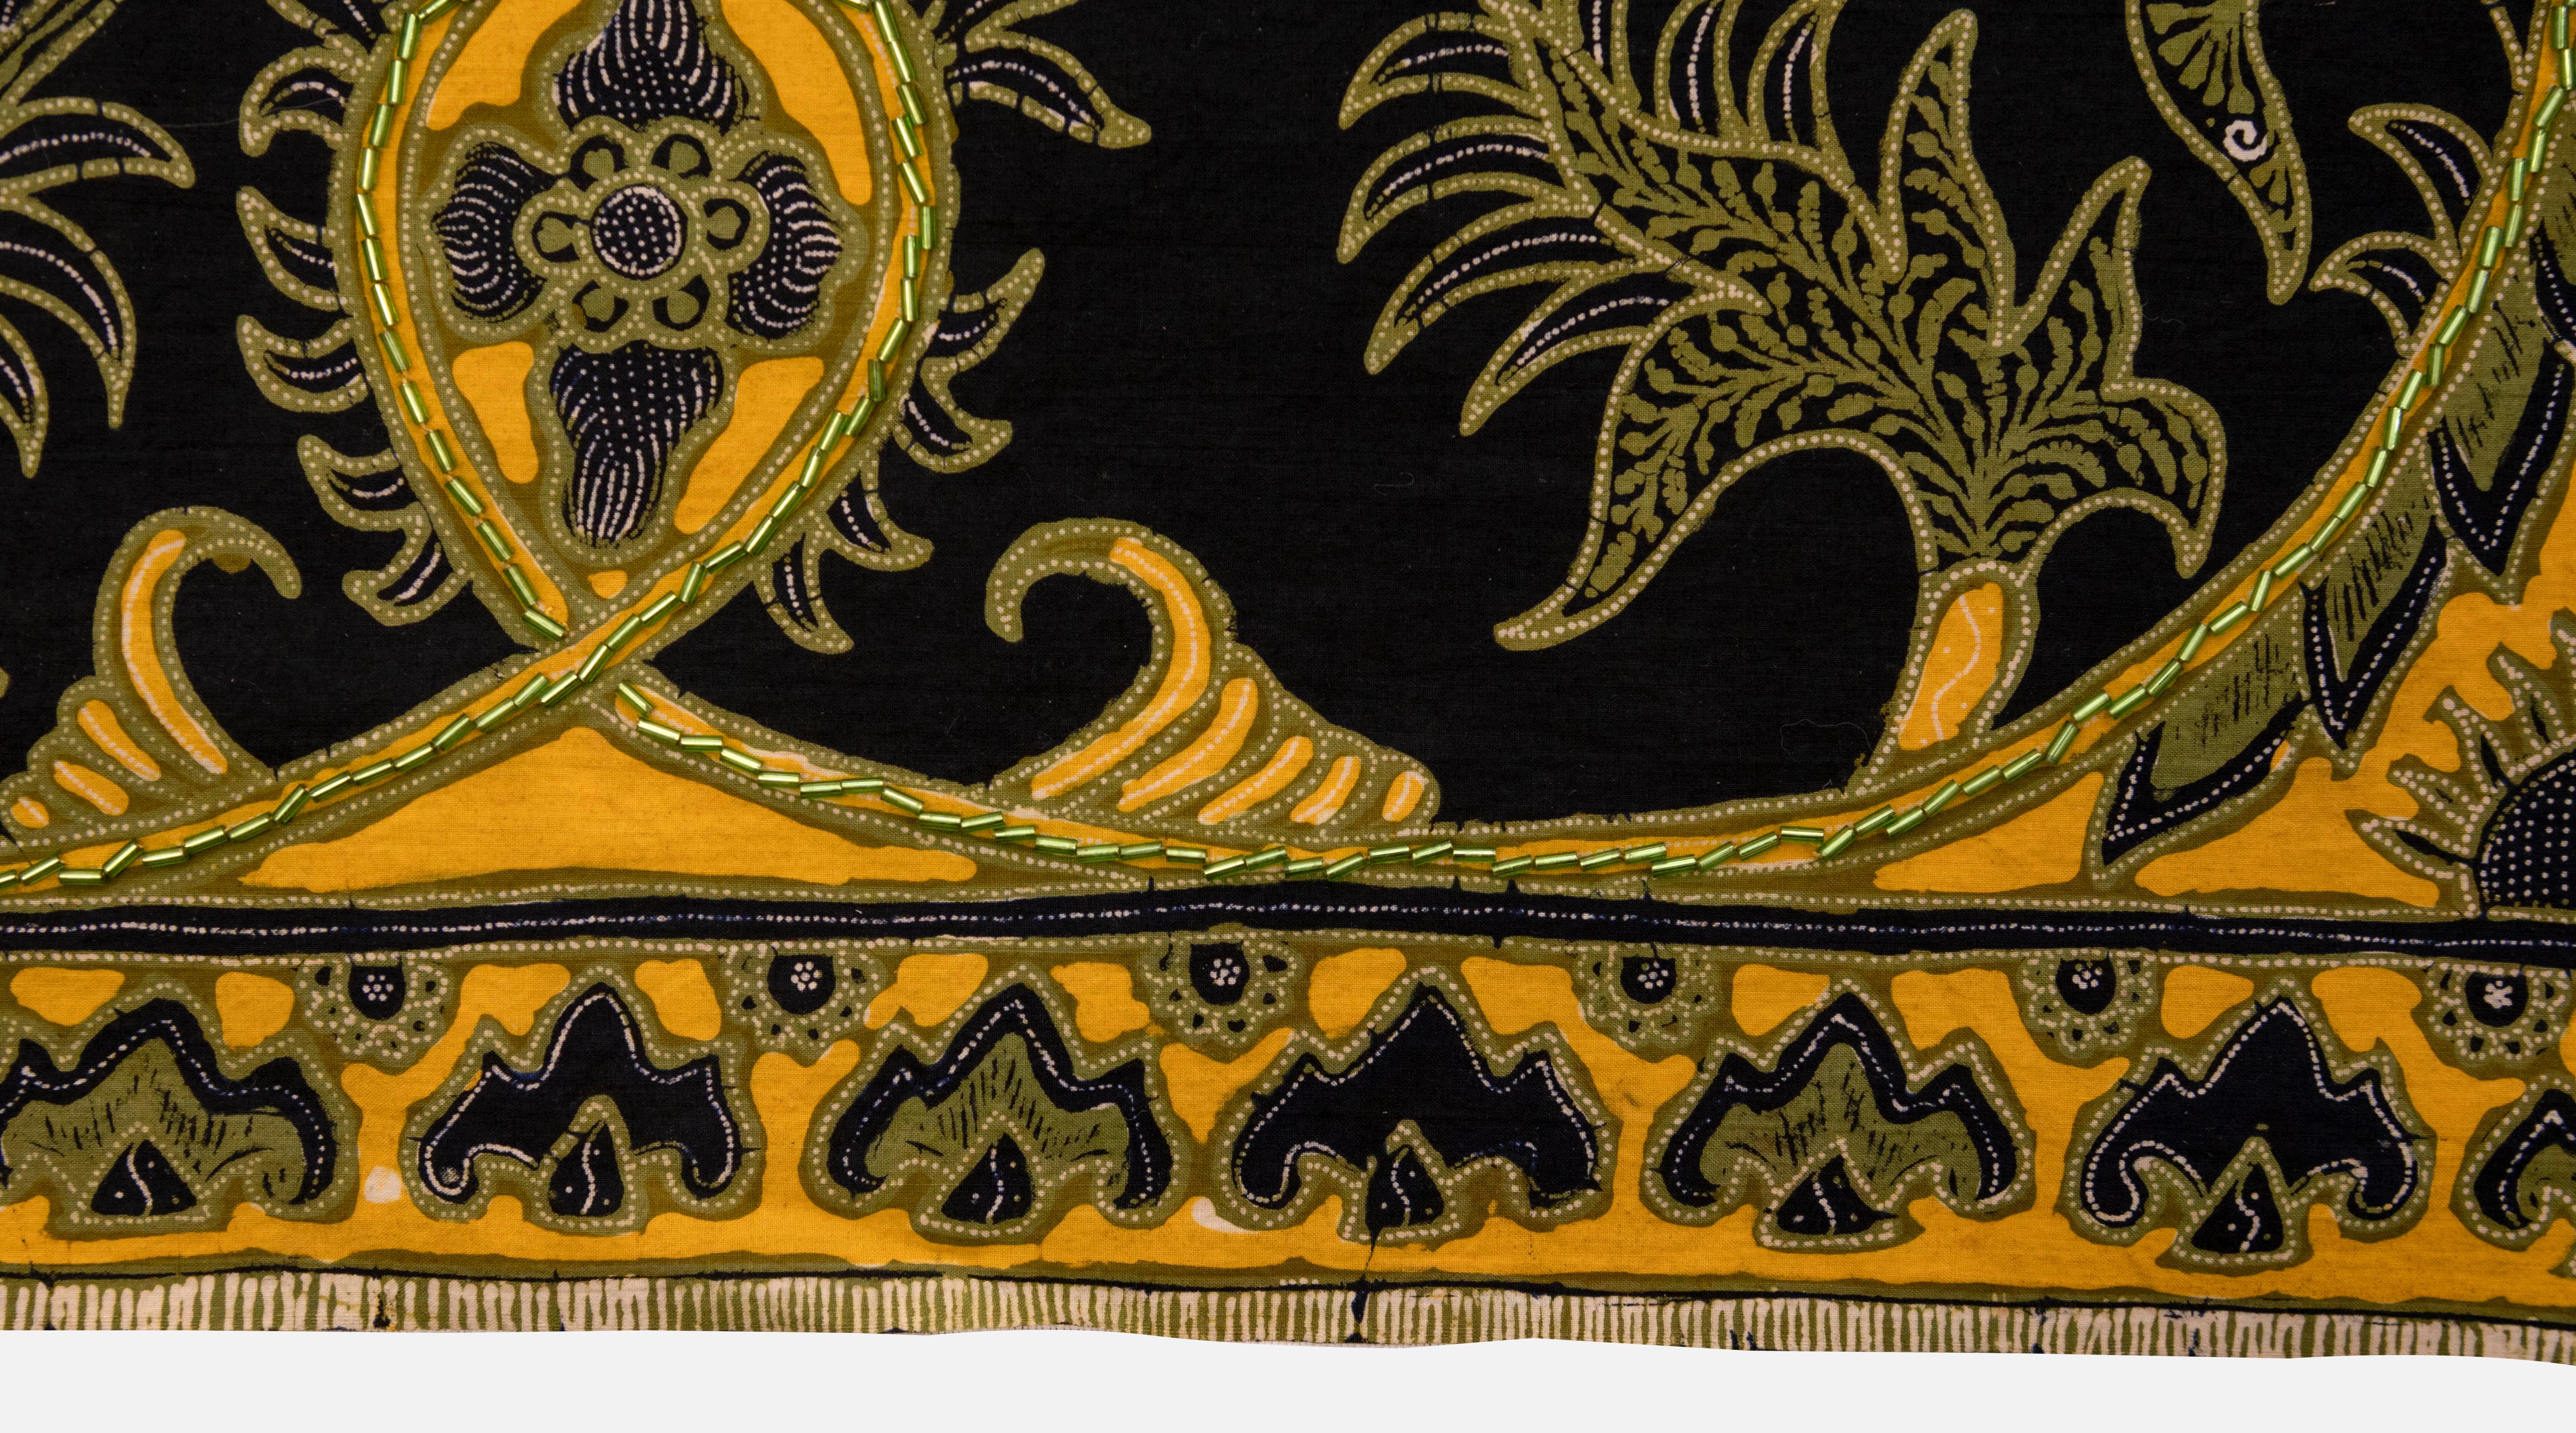 Indonesian cloth finely decorated with floreal motives in yellow and green on a dark blue background.

The item is not restored and is in very good condition.